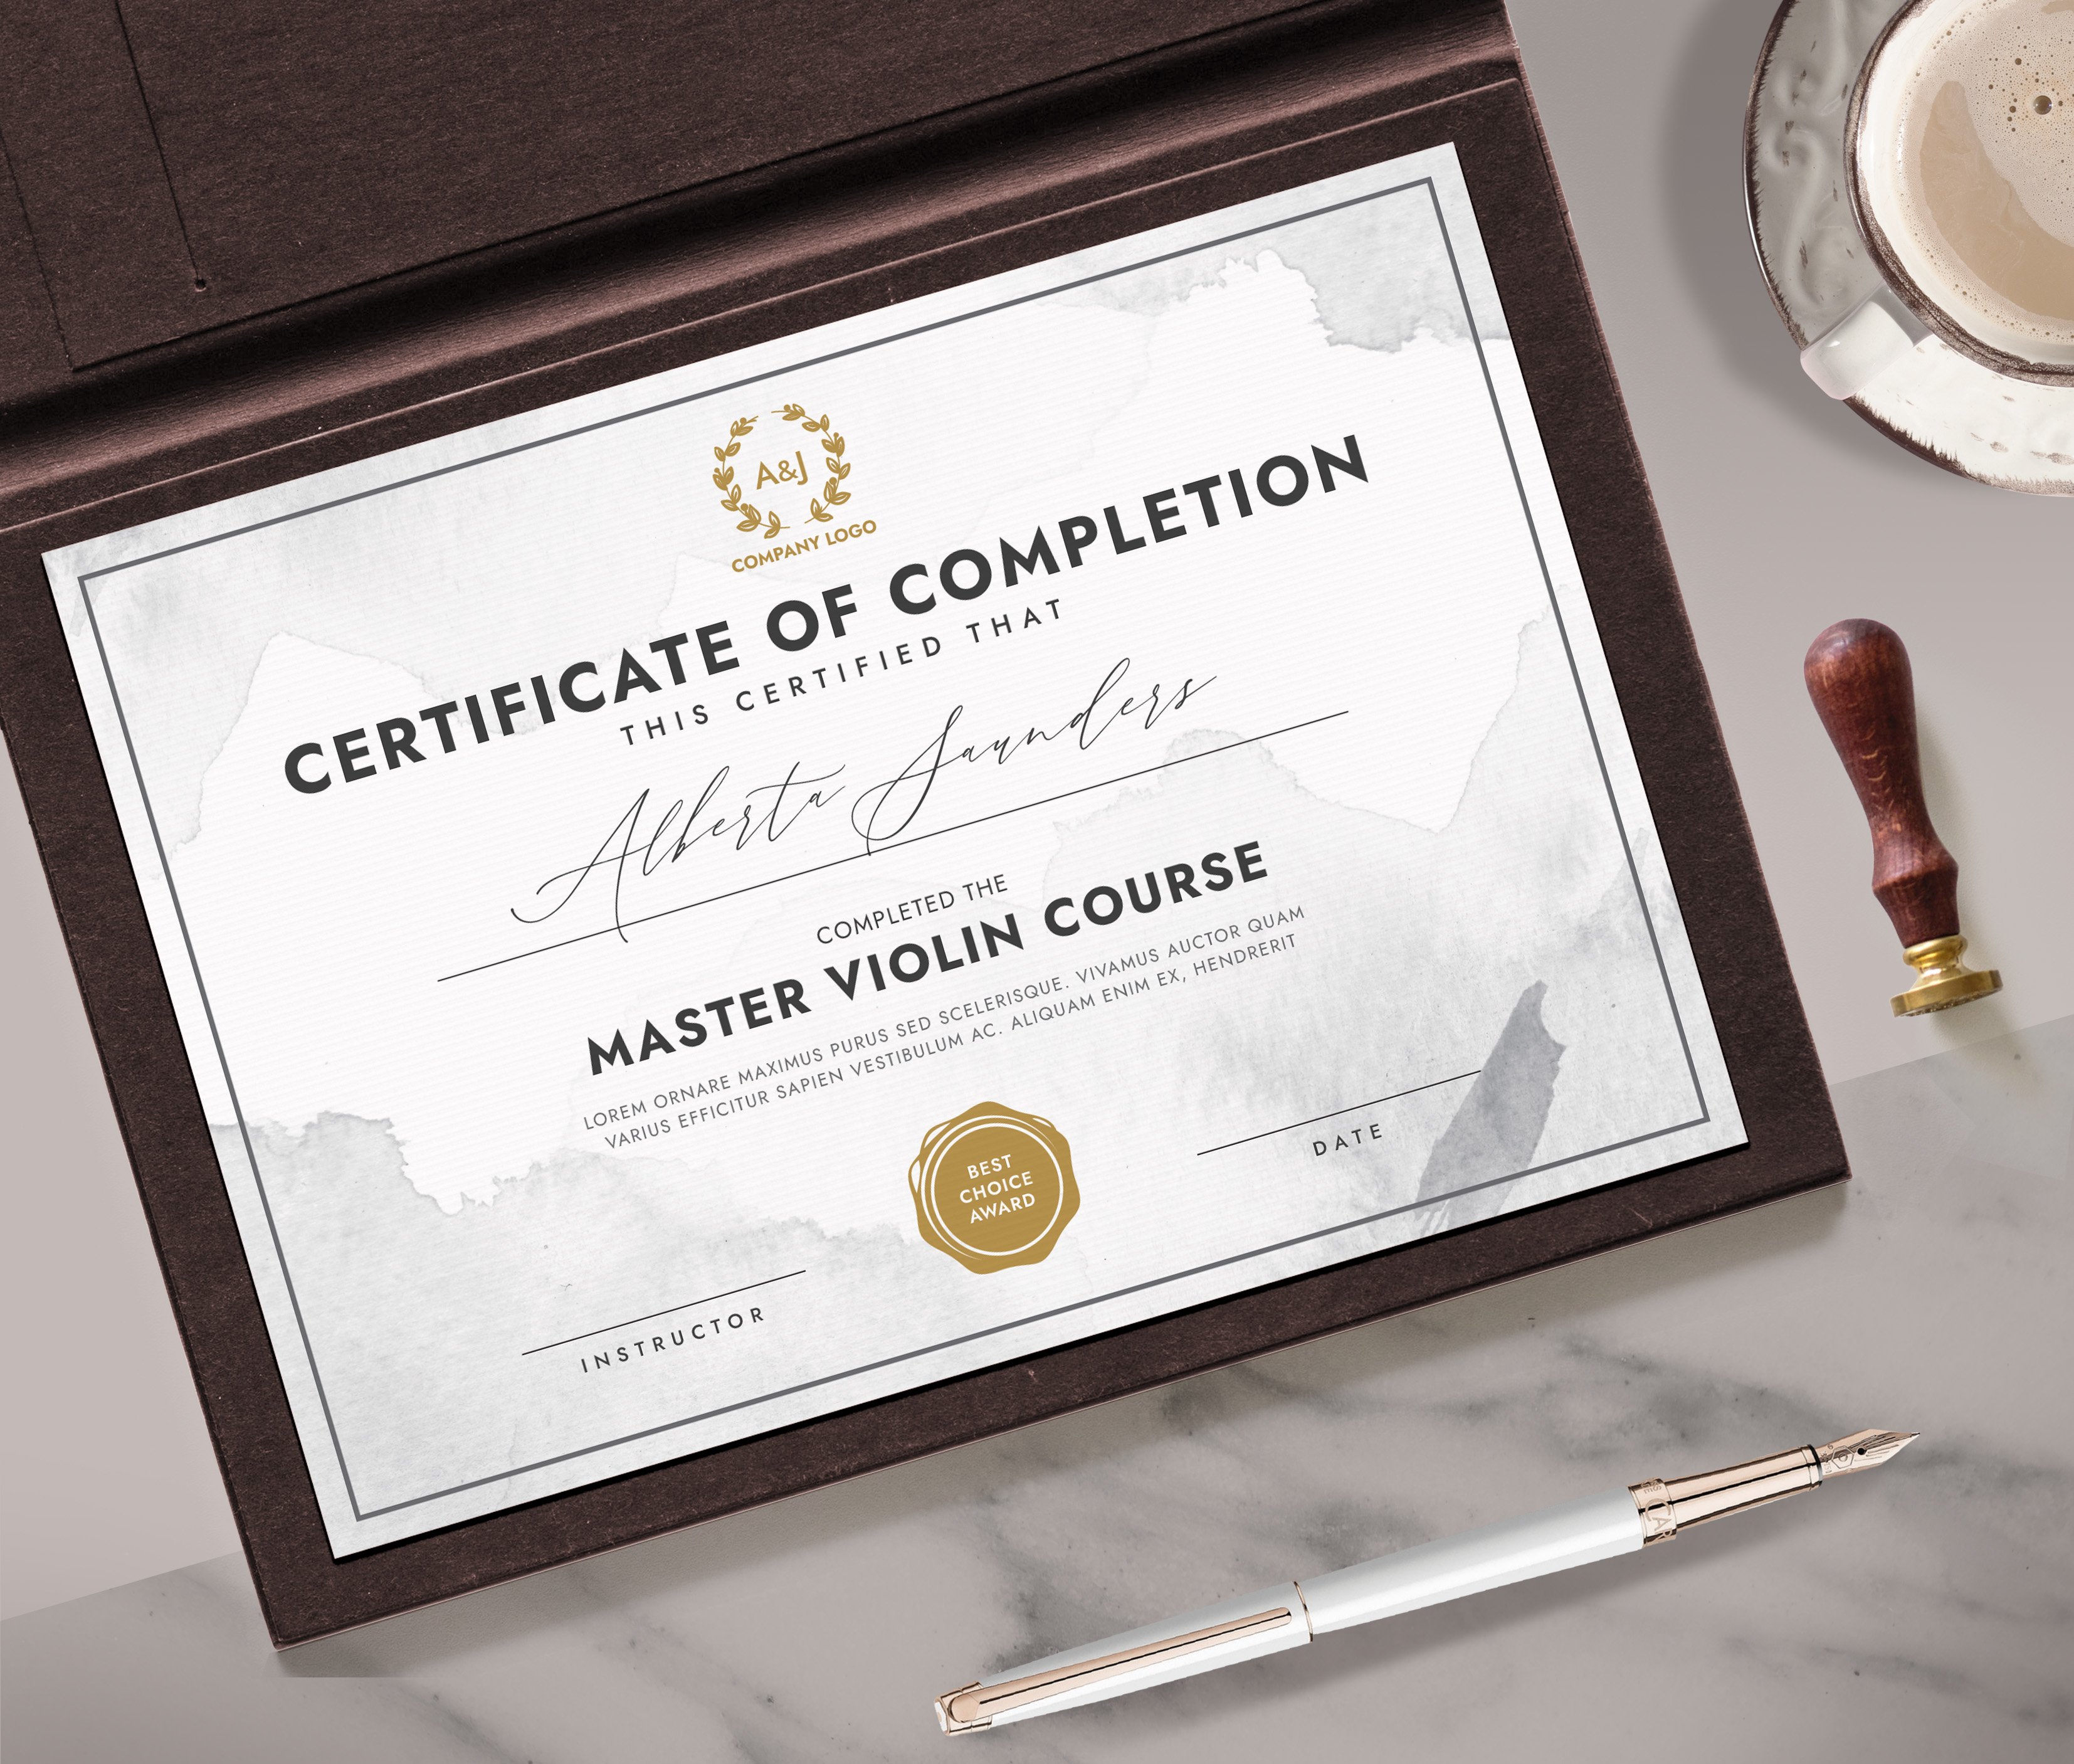 Certificate Template C001 cover image.